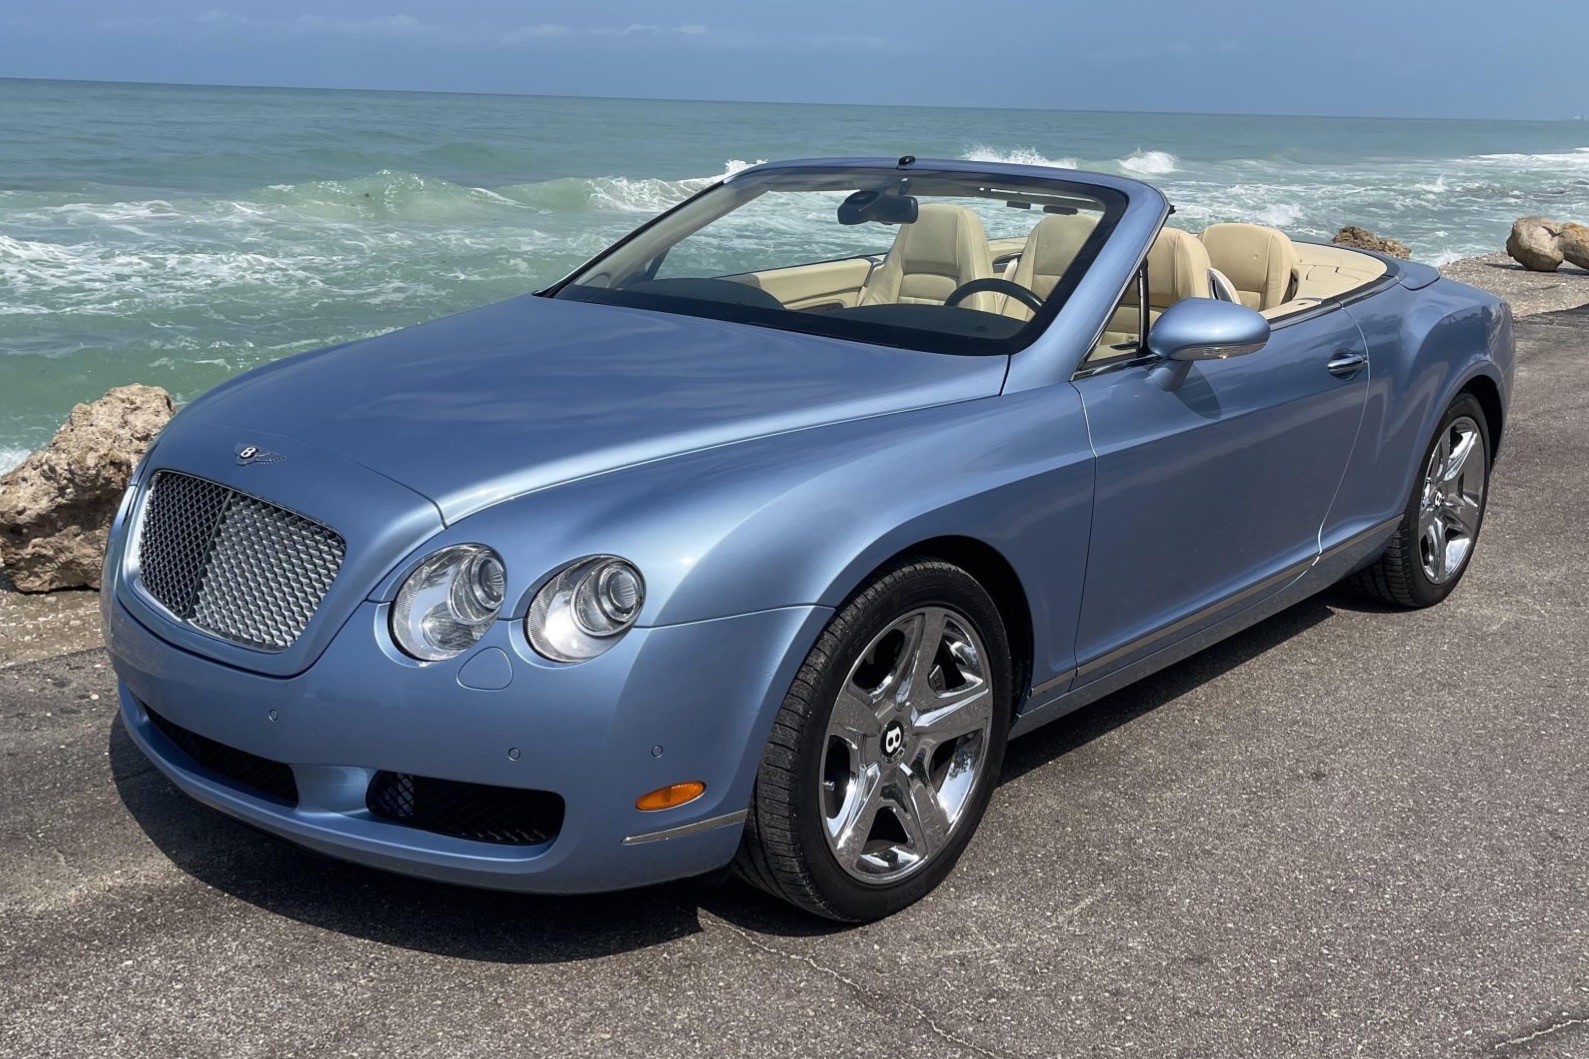 Used 2007 Bentley Continental GTC Review